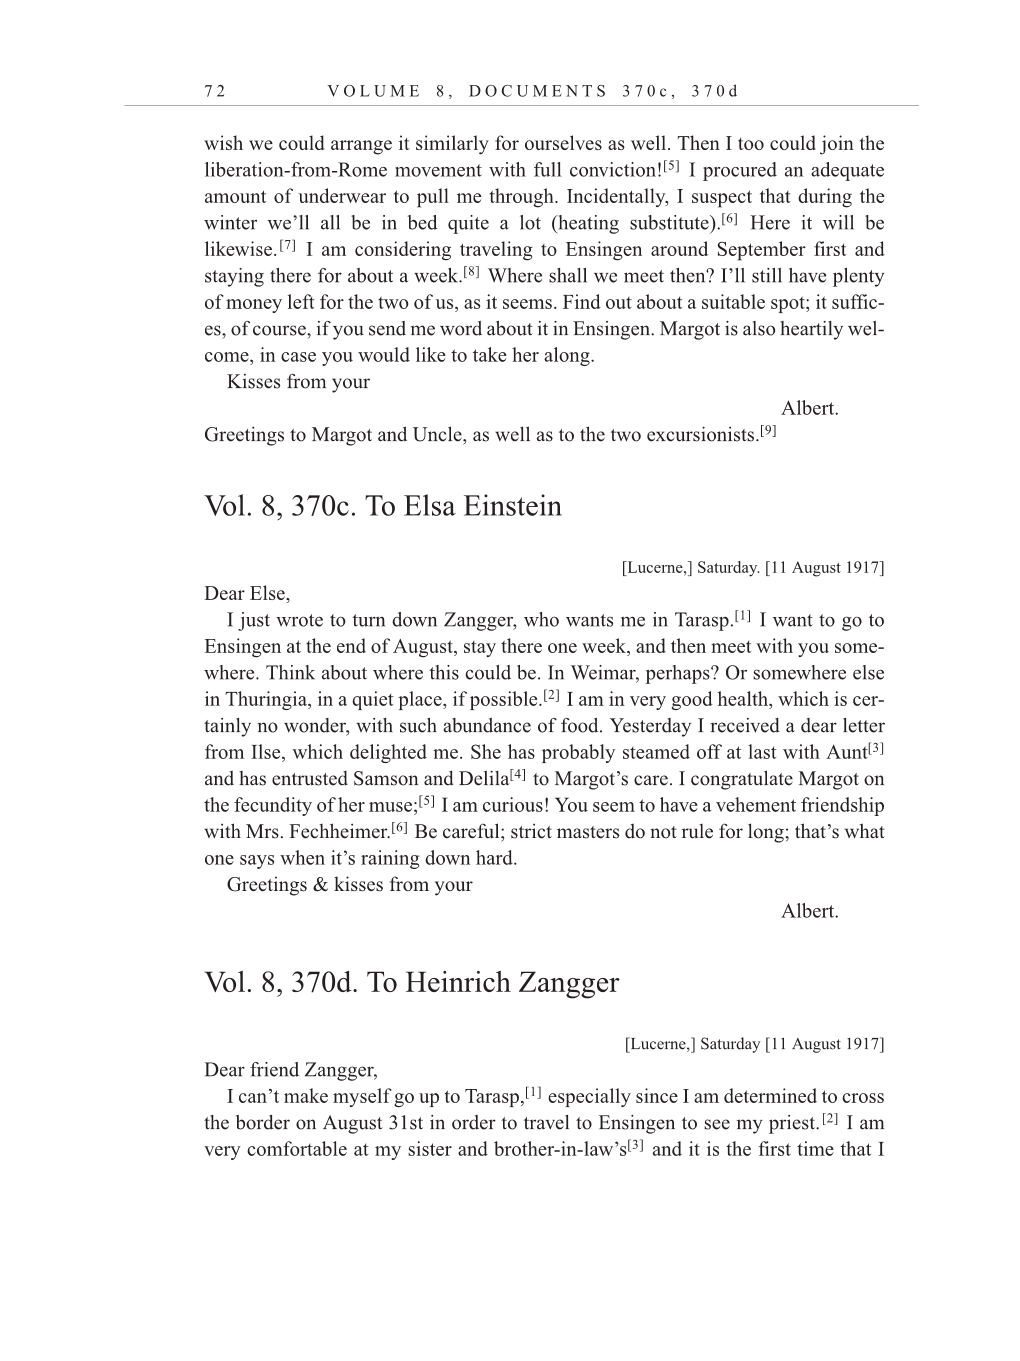 Volume 10: The Berlin Years: Correspondence, May-December 1920, and Supplementary Correspondence, 1909-1920 (English translation supplement) page 72